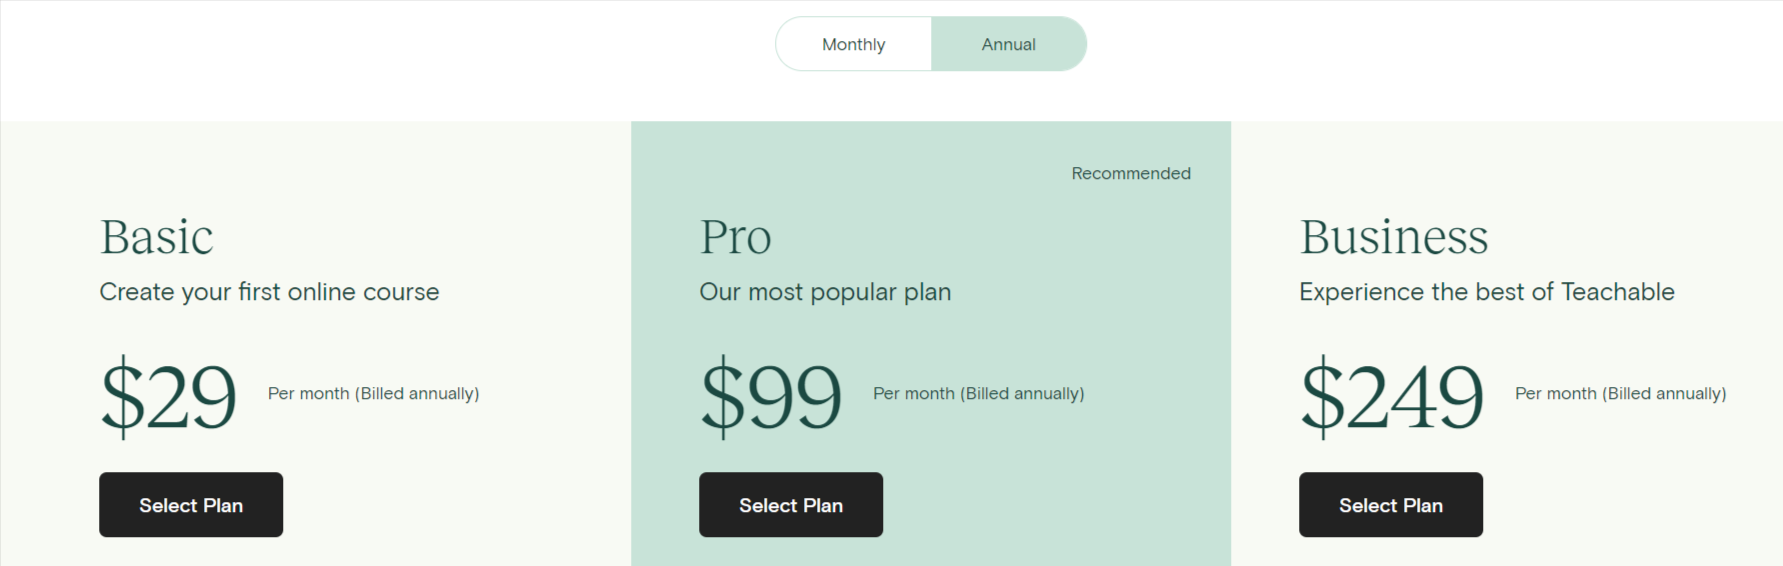 Teachable's Pricing Plans